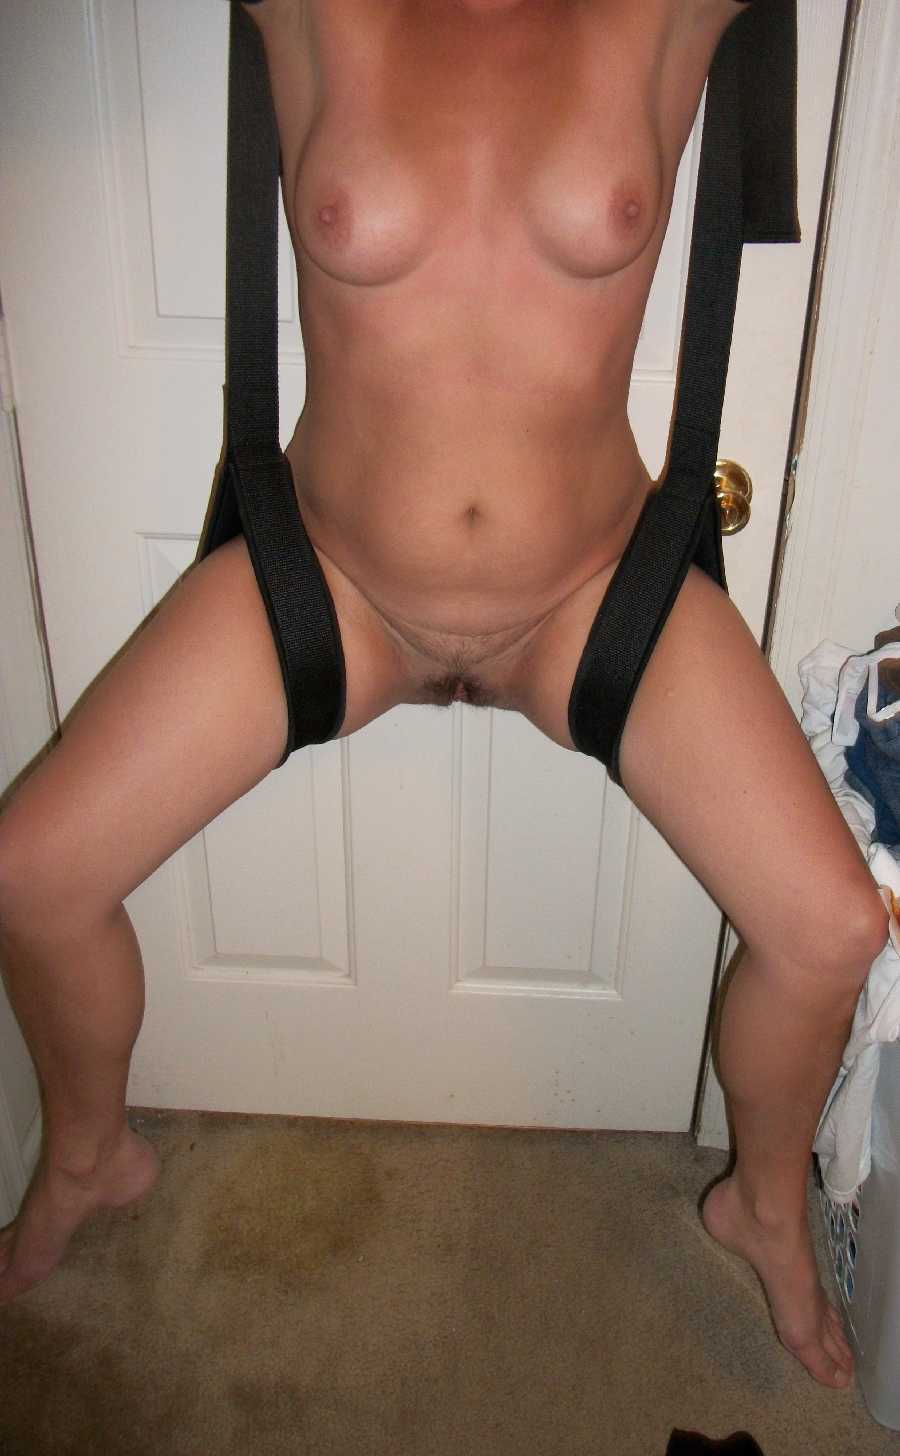 Wife in a Sex Swing pic